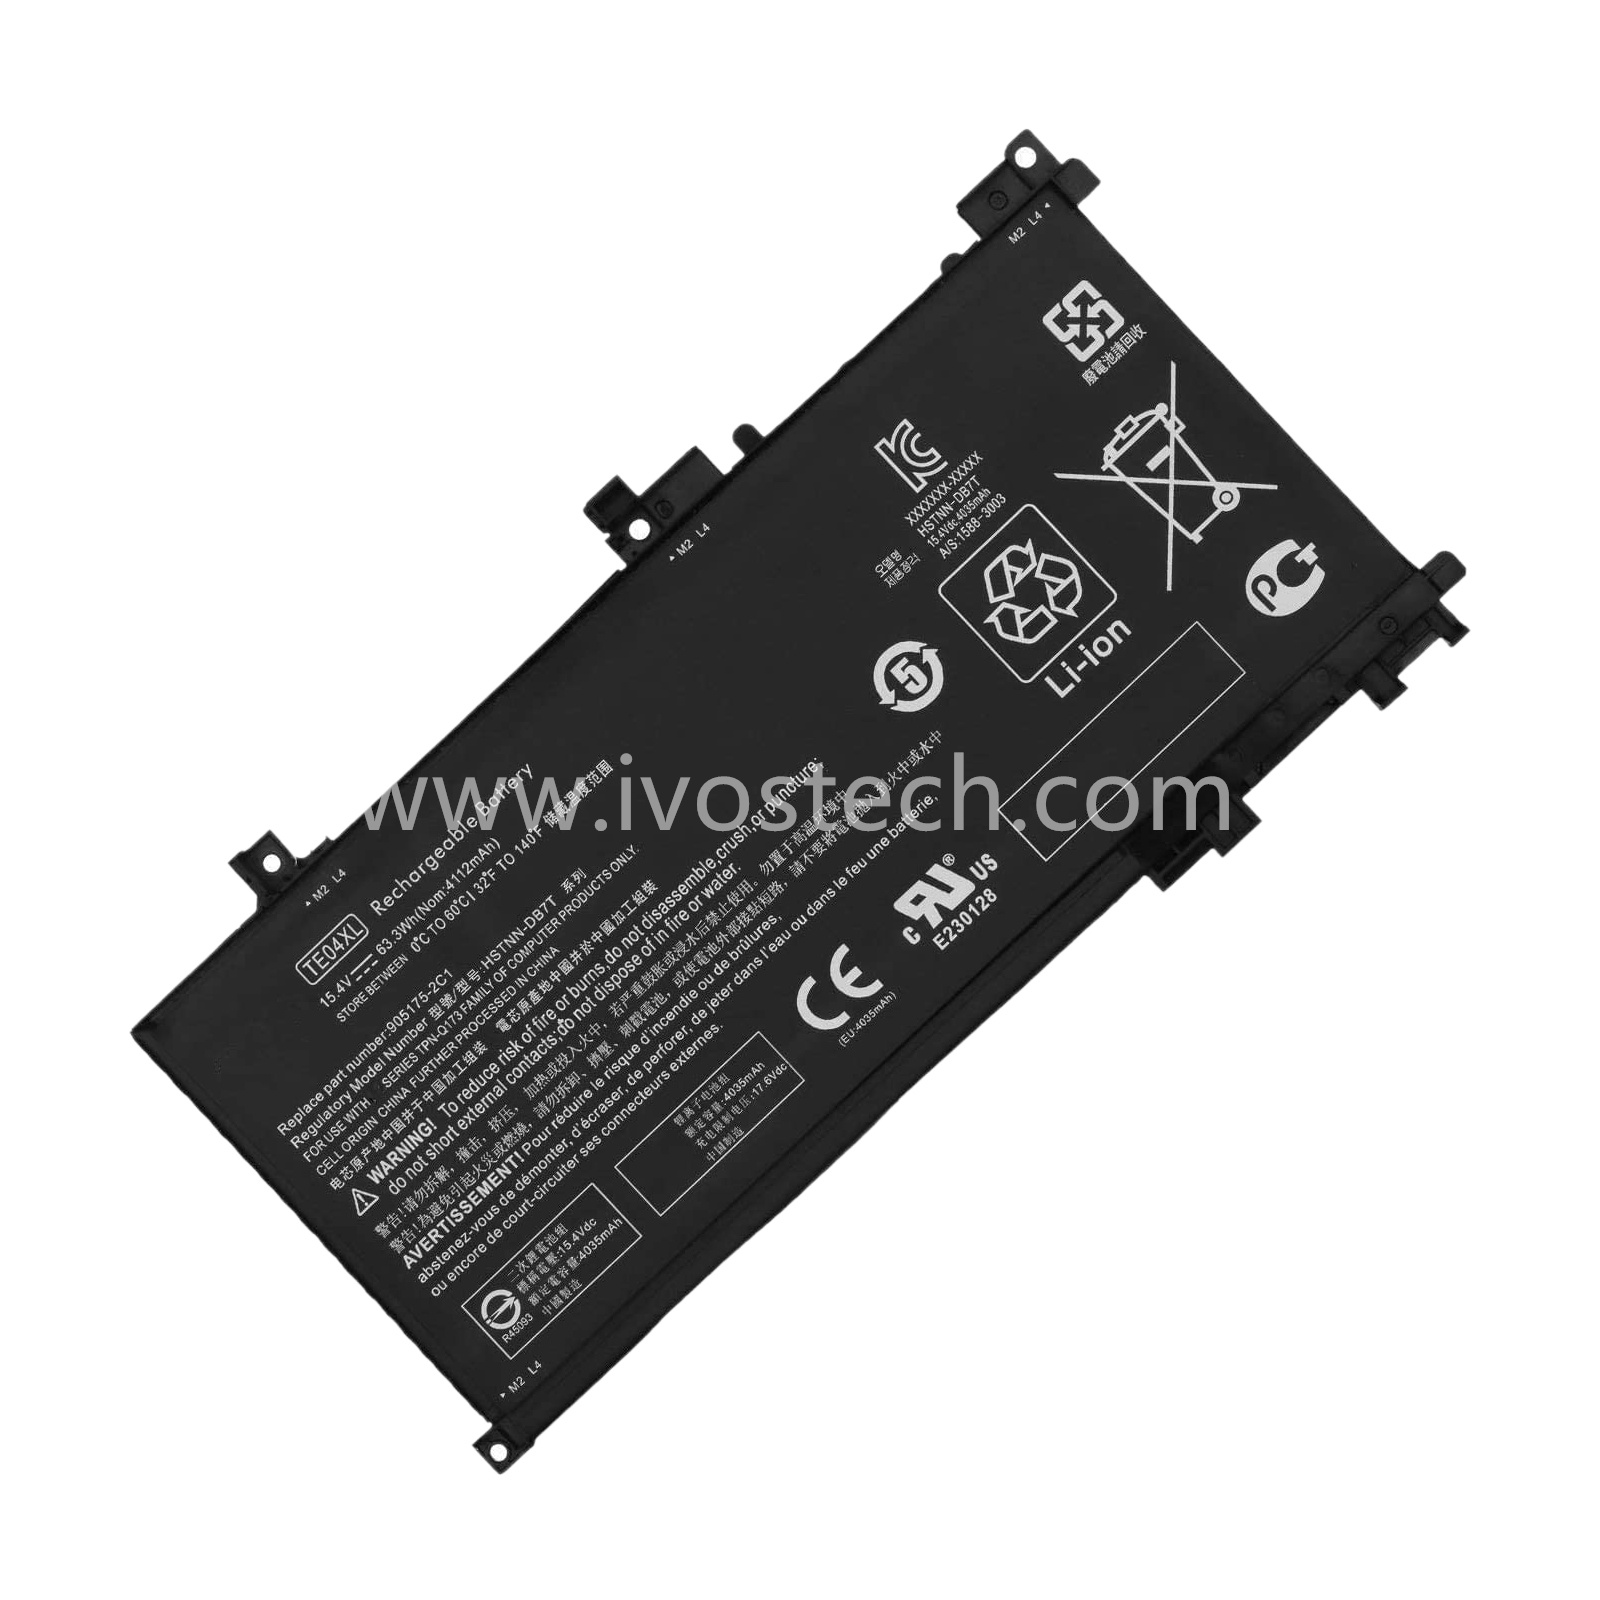 TE04XL 63.3Wh 15.4V Replacement Laptop Battery for HP Omen 15-AX Series